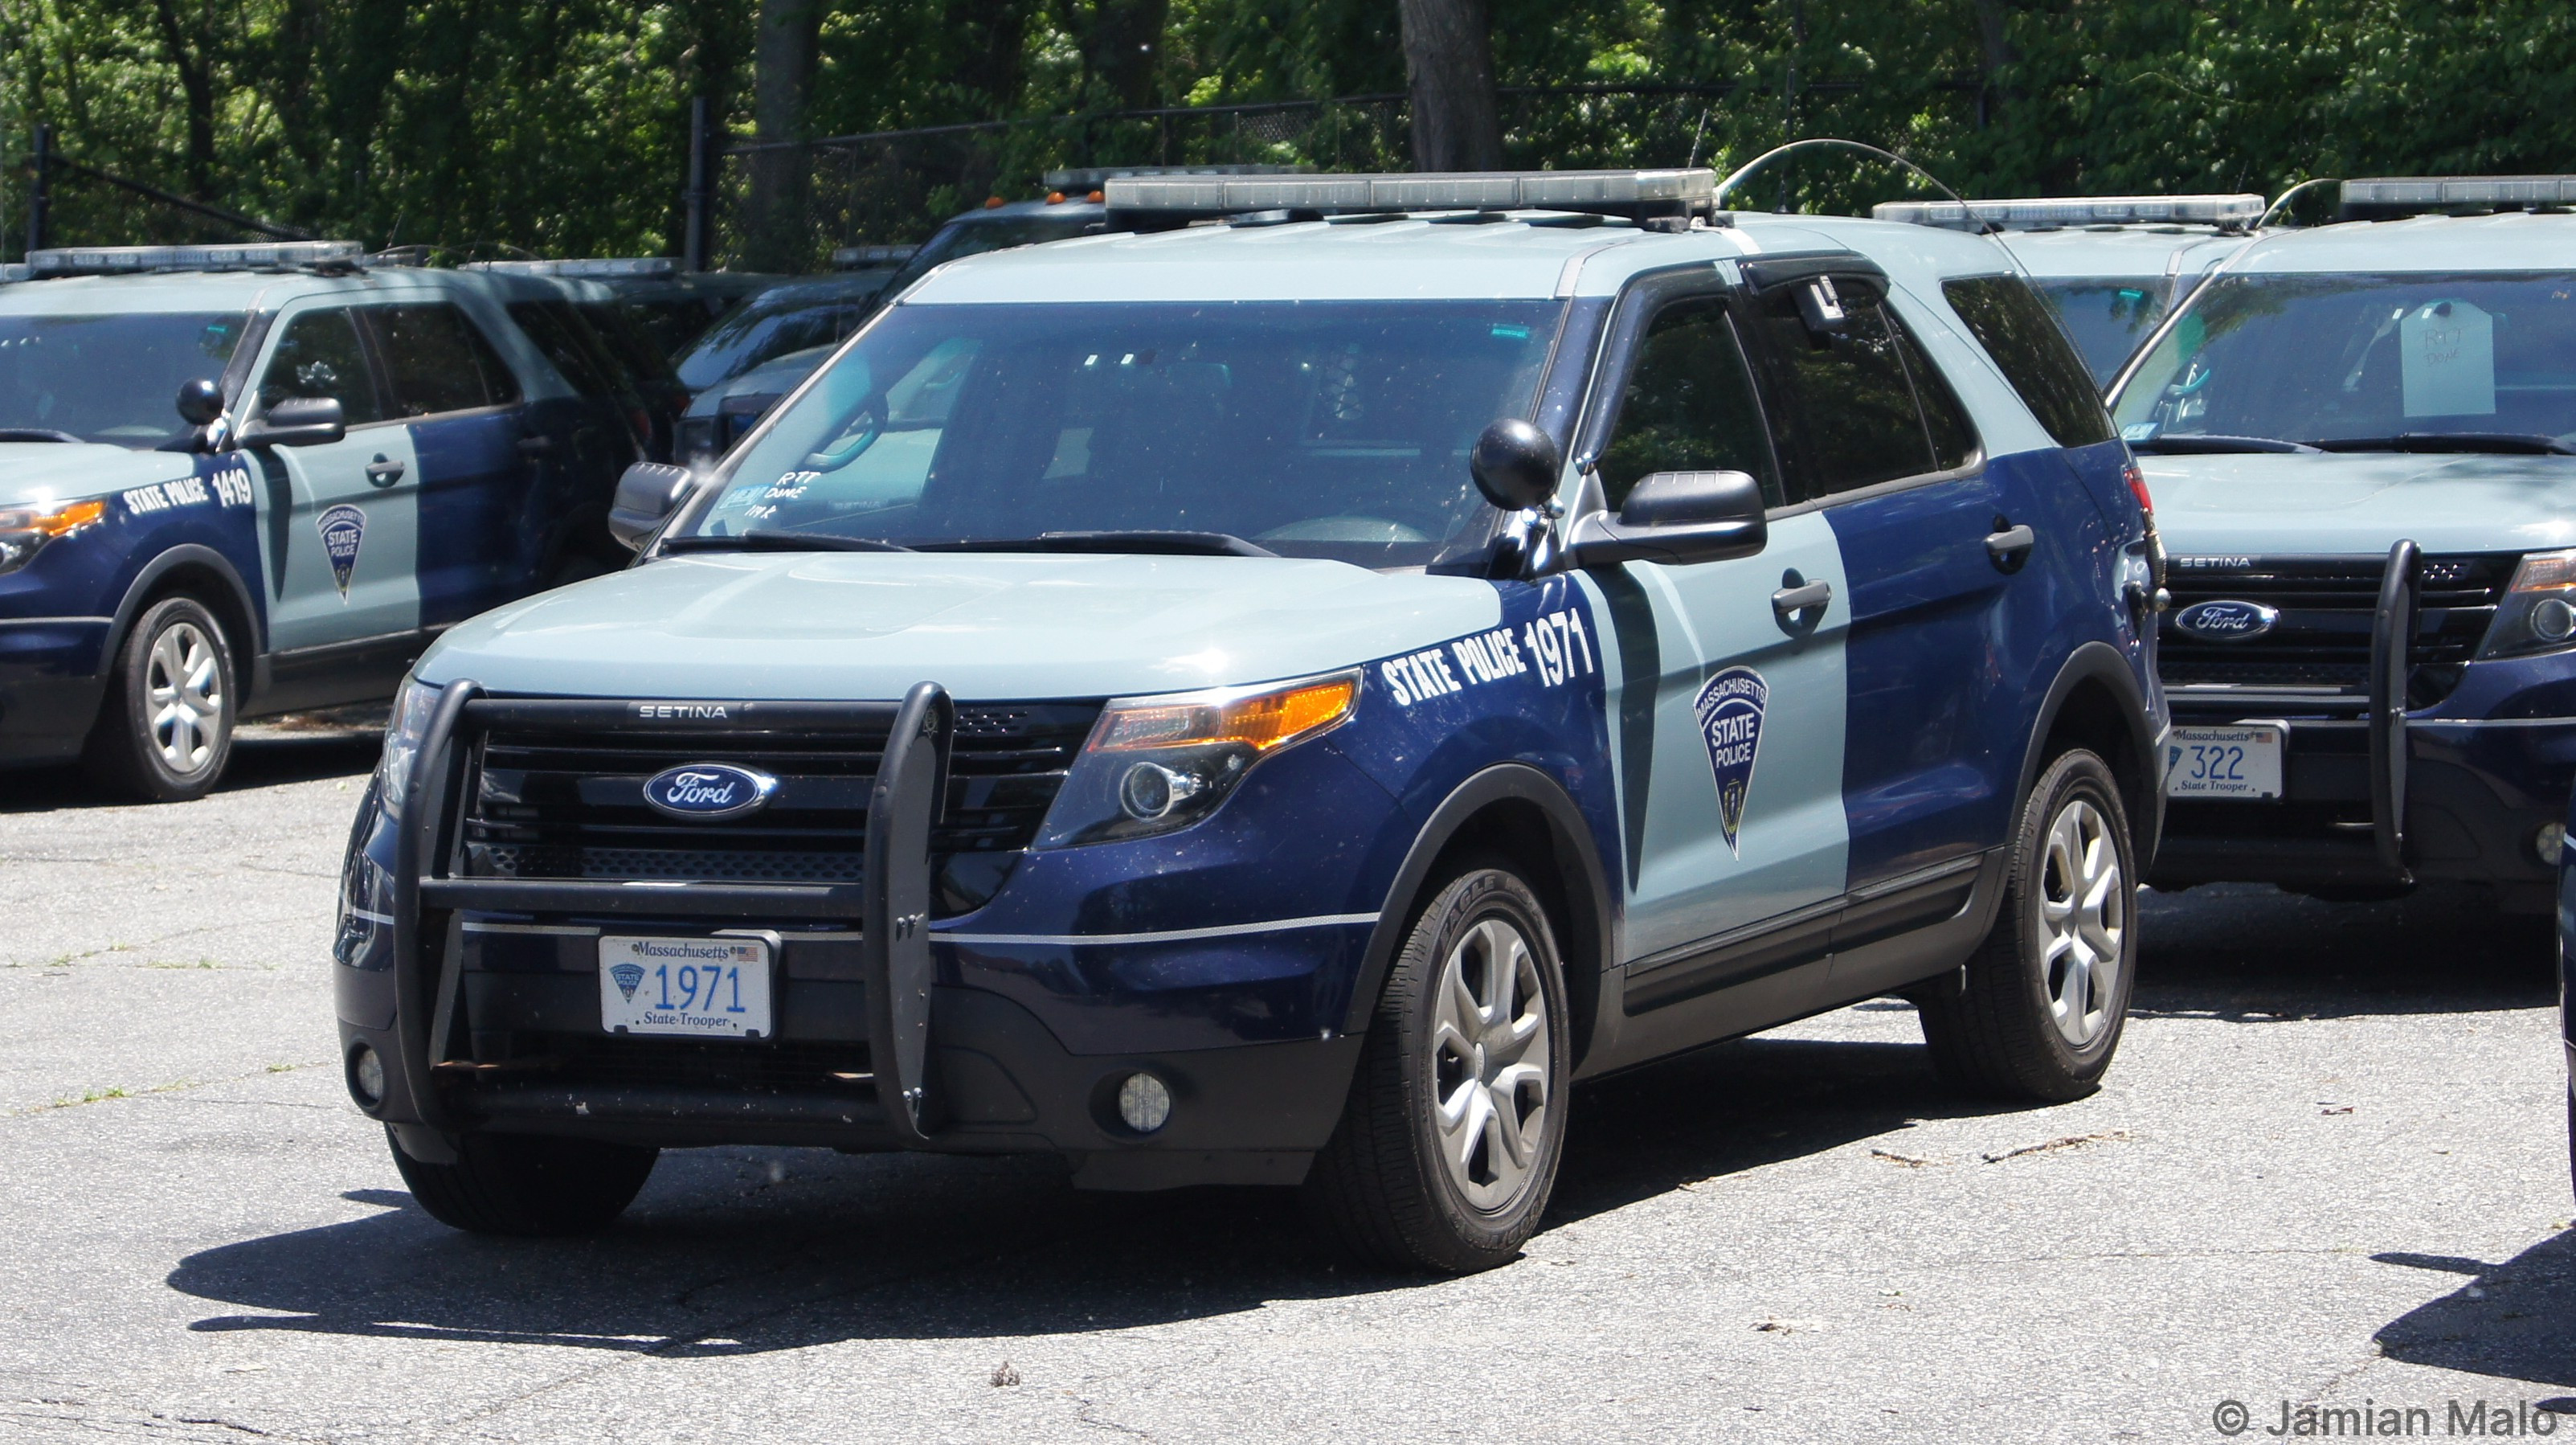 A photo  of Massachusetts State Police
            Cruiser 1971, a 2013-2014 Ford Police Interceptor Utility             taken by Jamian Malo